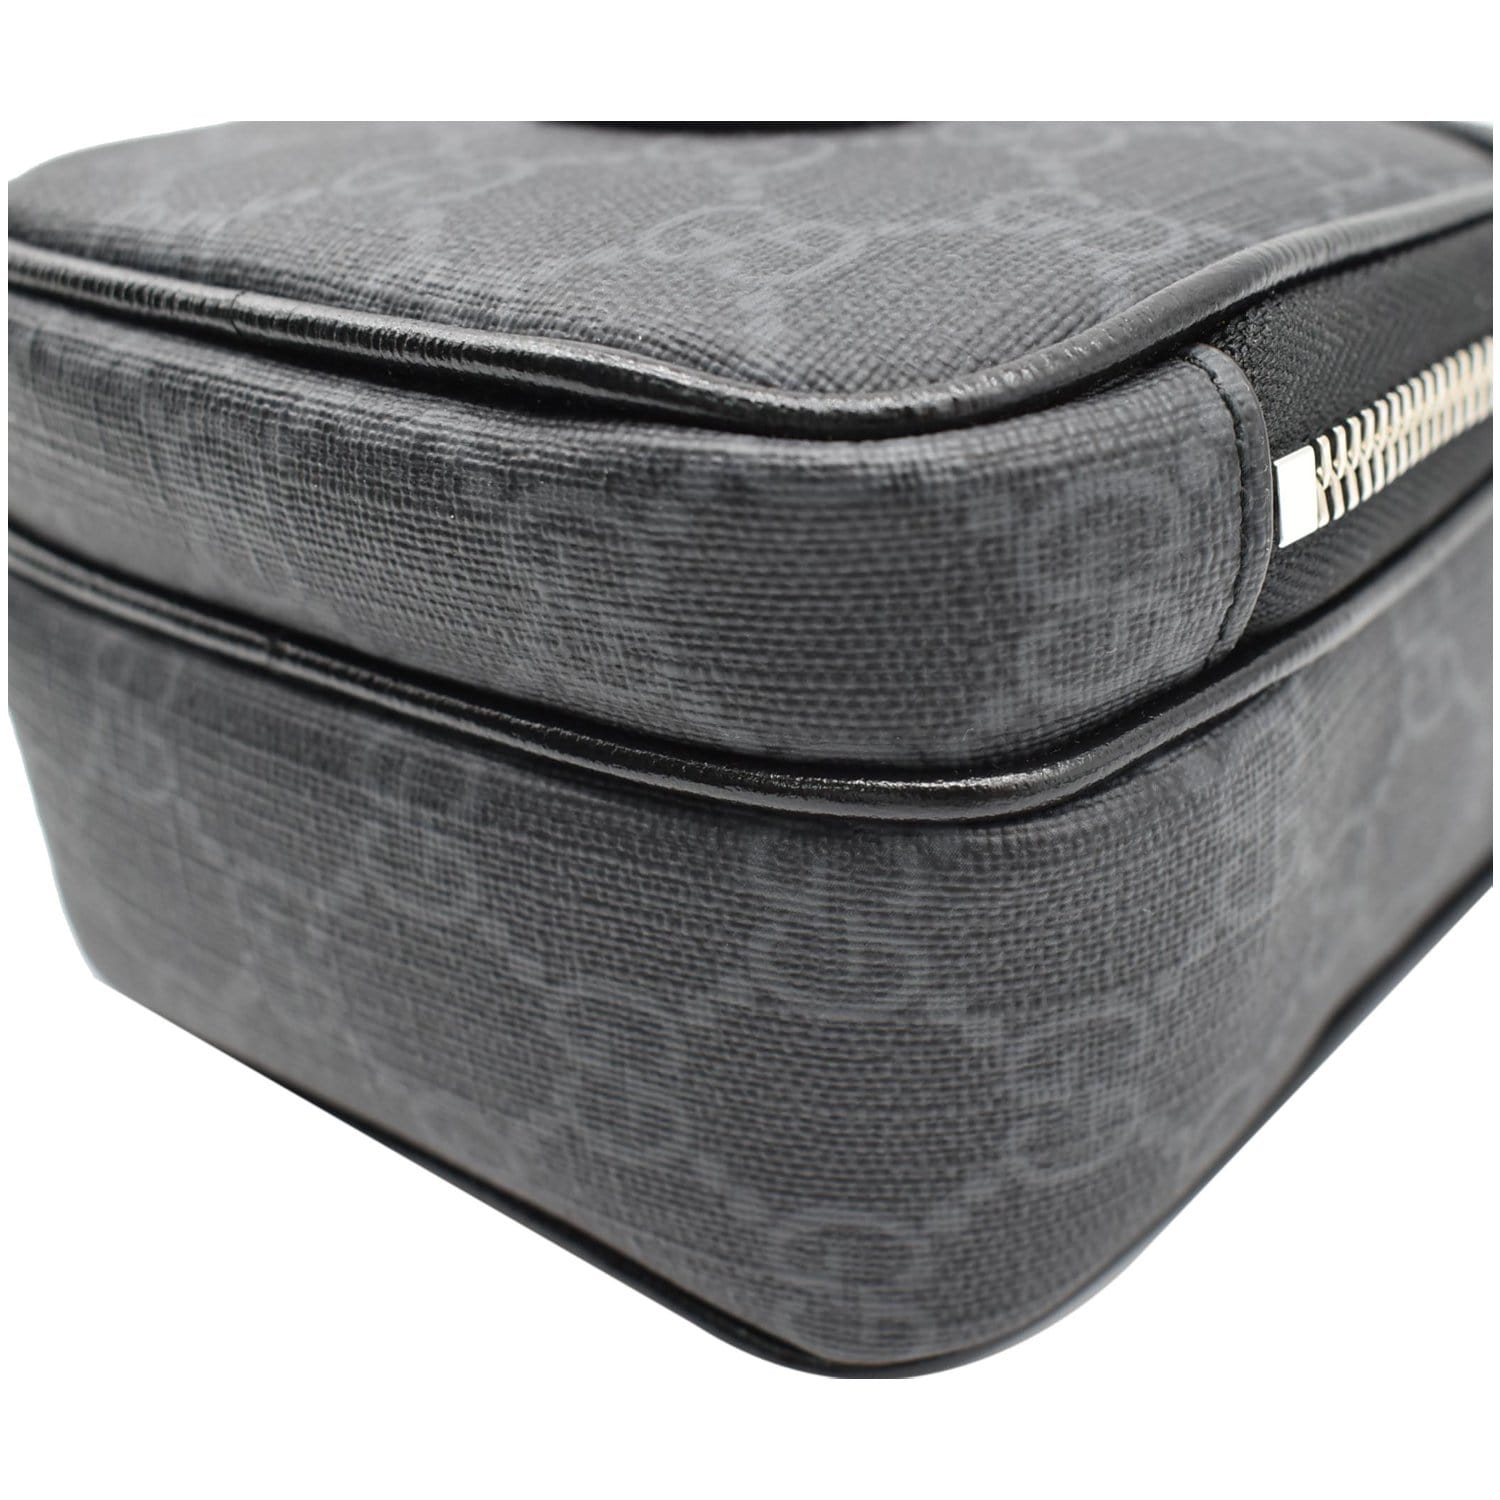 NEW! Gucci GG Supreme Interlocking G Travel Cosmetic Pouch Bag Toiletry  Pouch